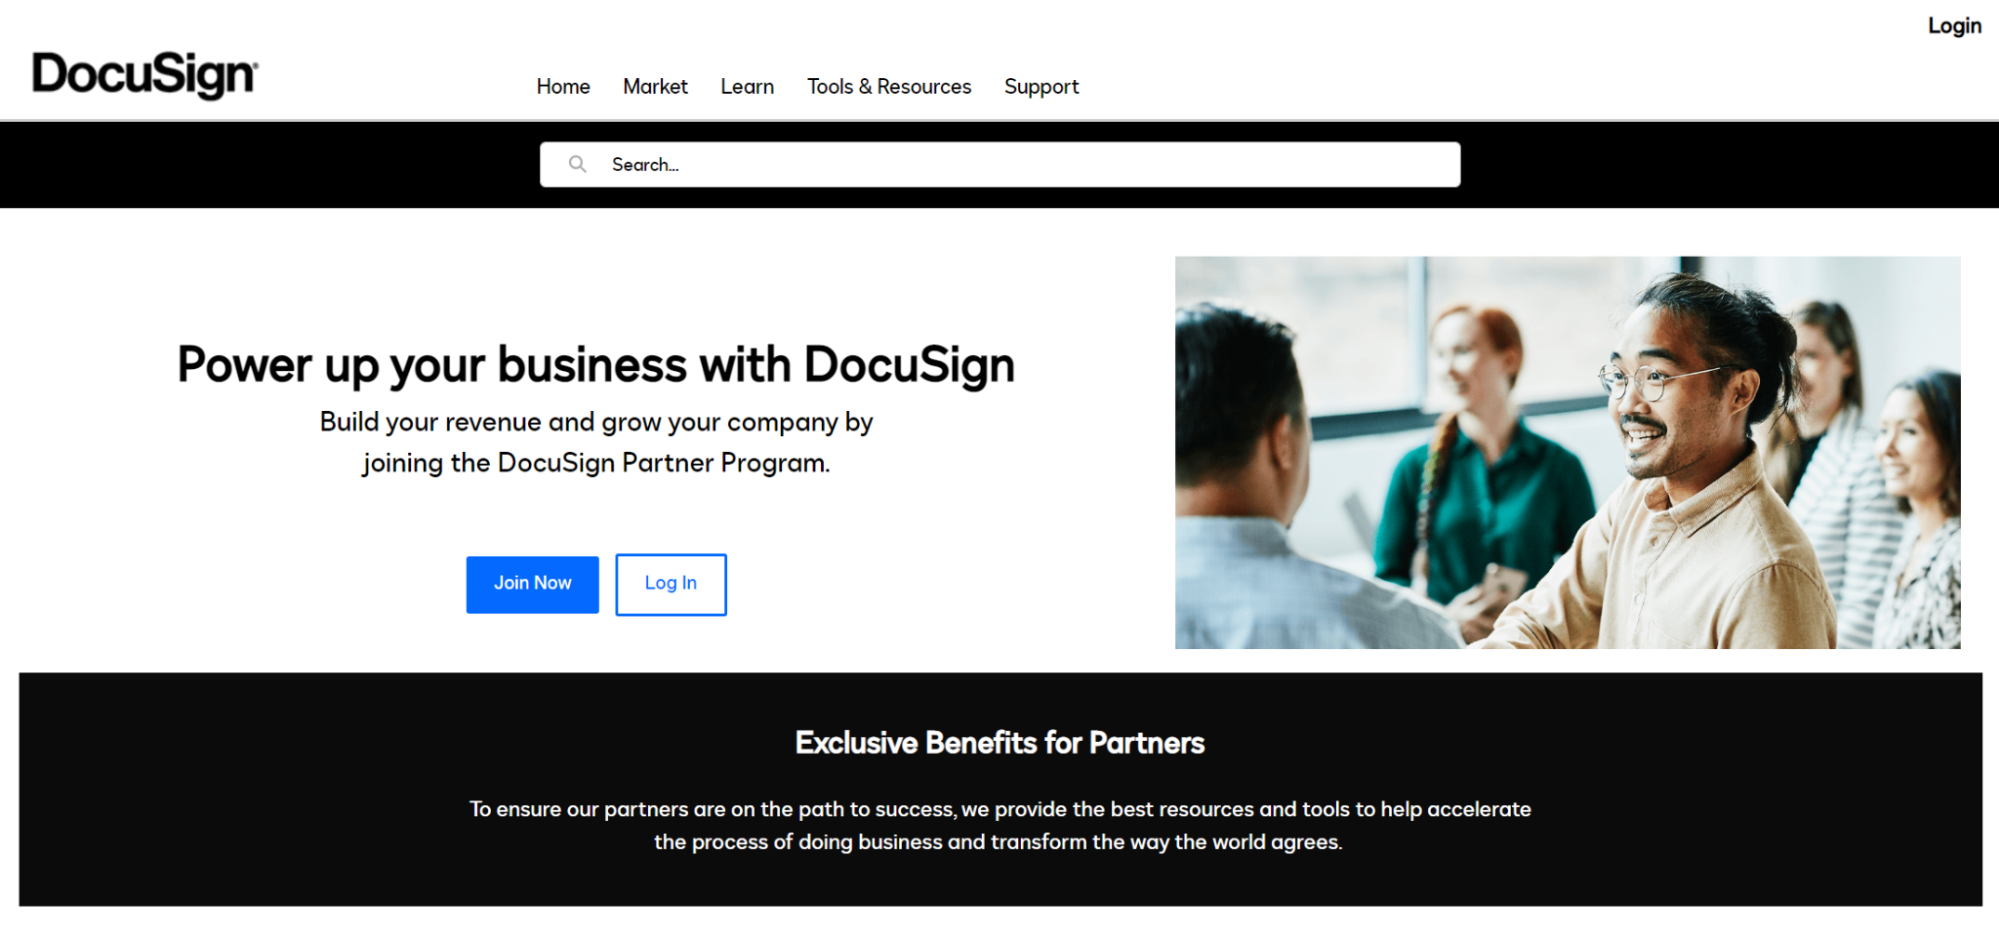 DocuSign expands its influence and builds a new customer pipeline through its integration partner program.